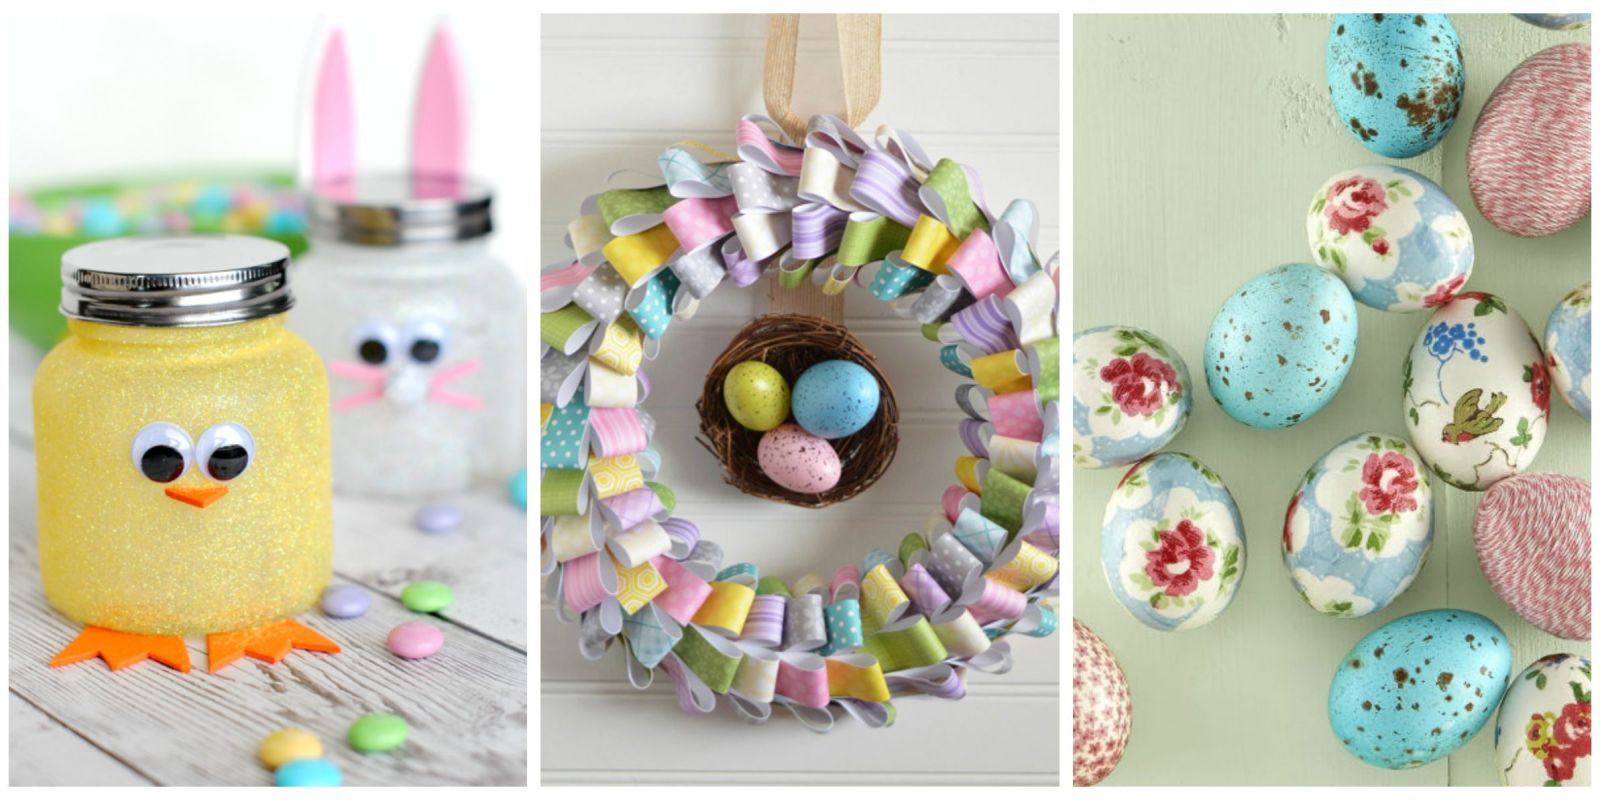 Fun Ideas For Easter
 60 Easy Easter Crafts Ideas for Easter DIY Decorations